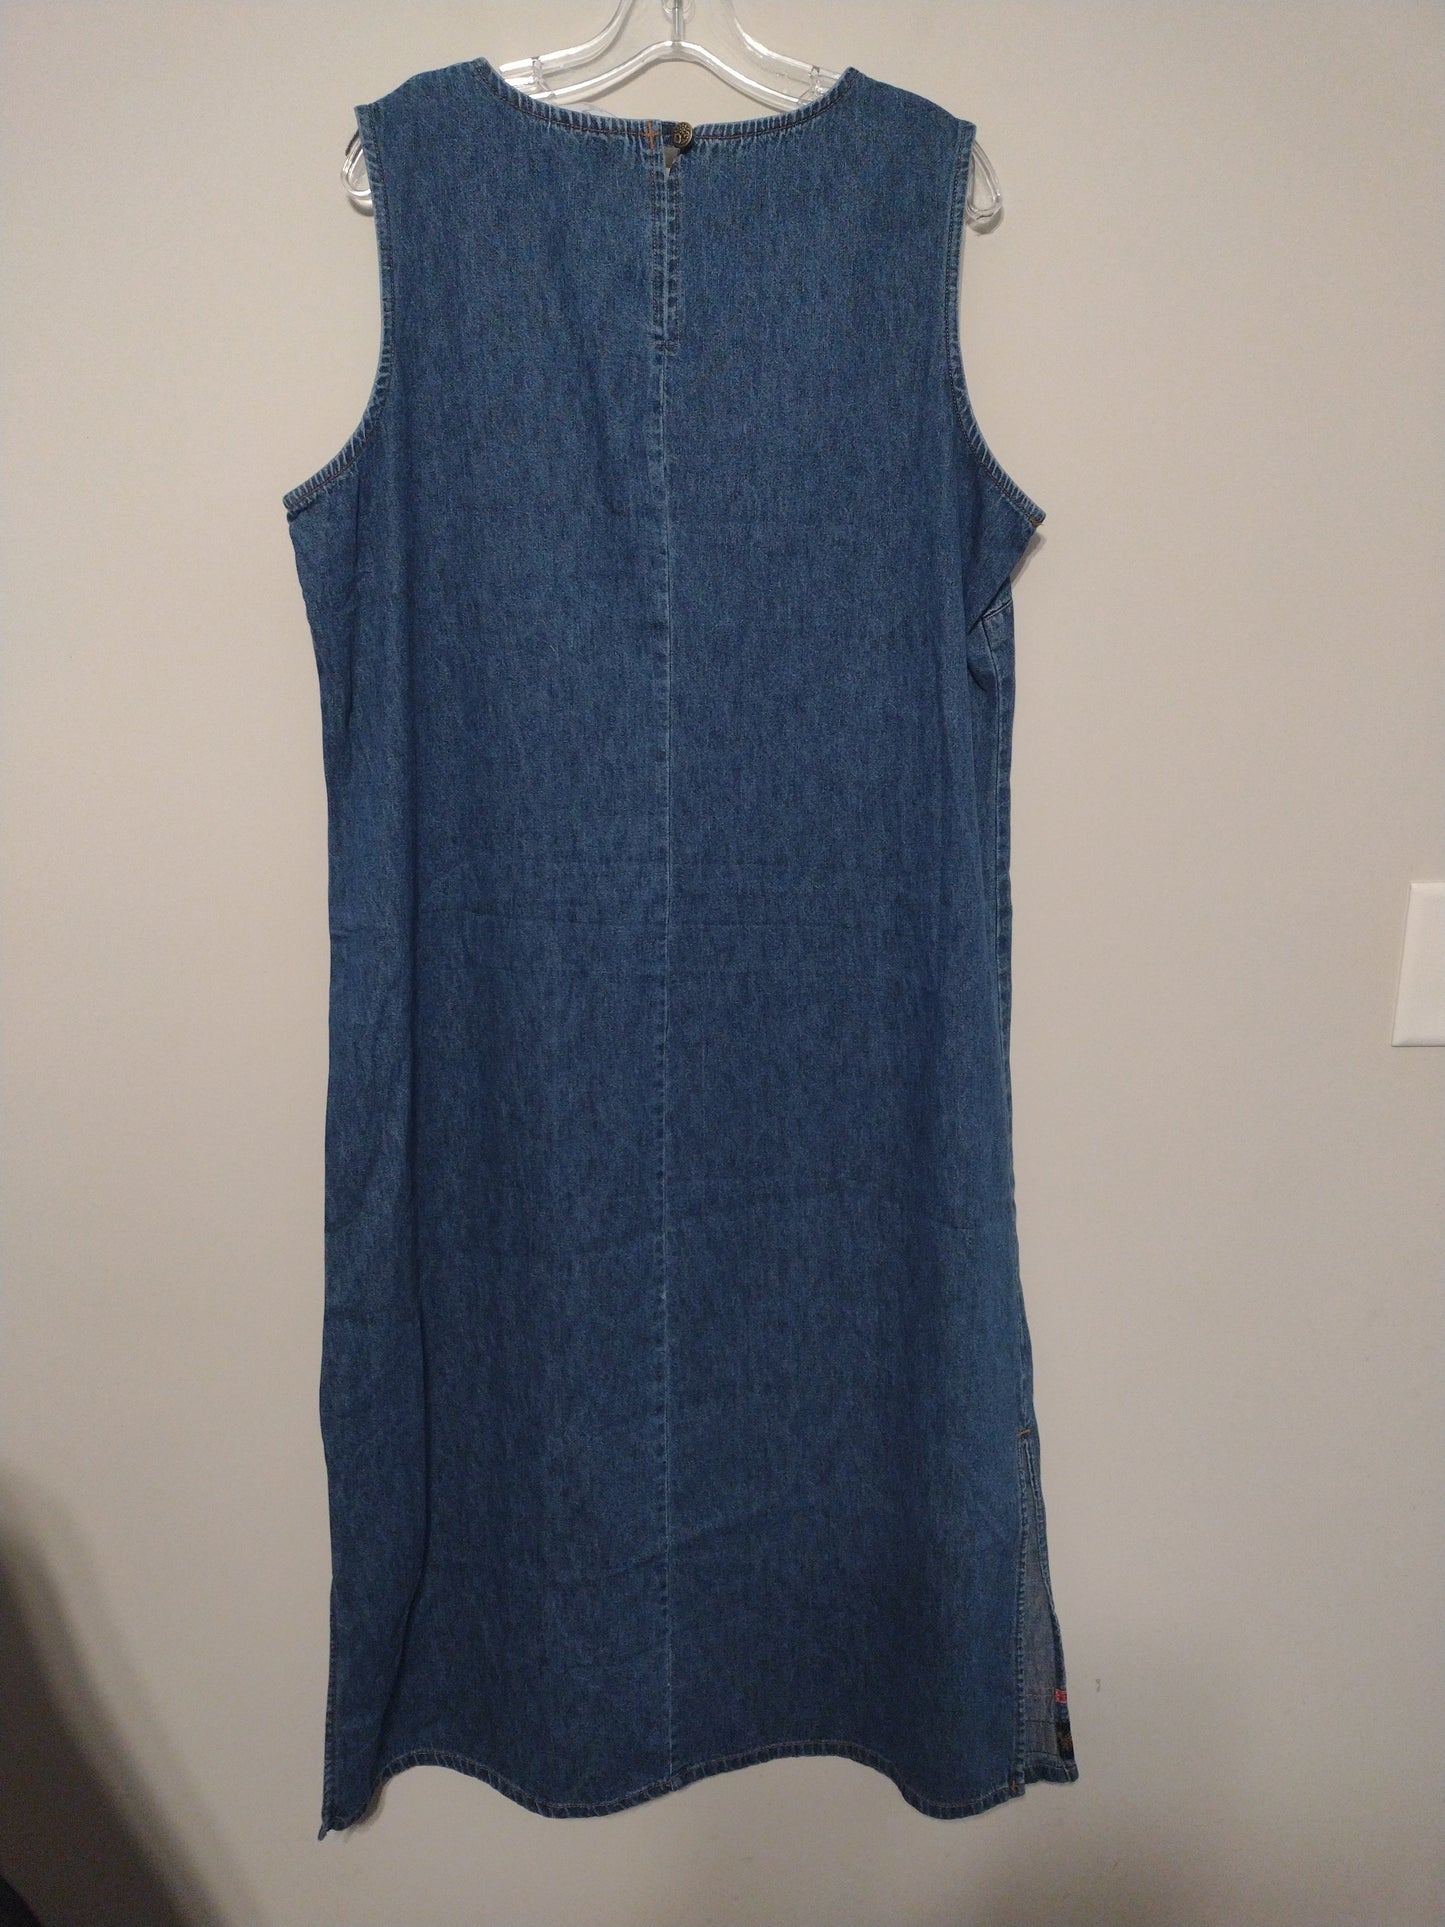 Dress Casual Maxi By Studio Ease  Size: 1x